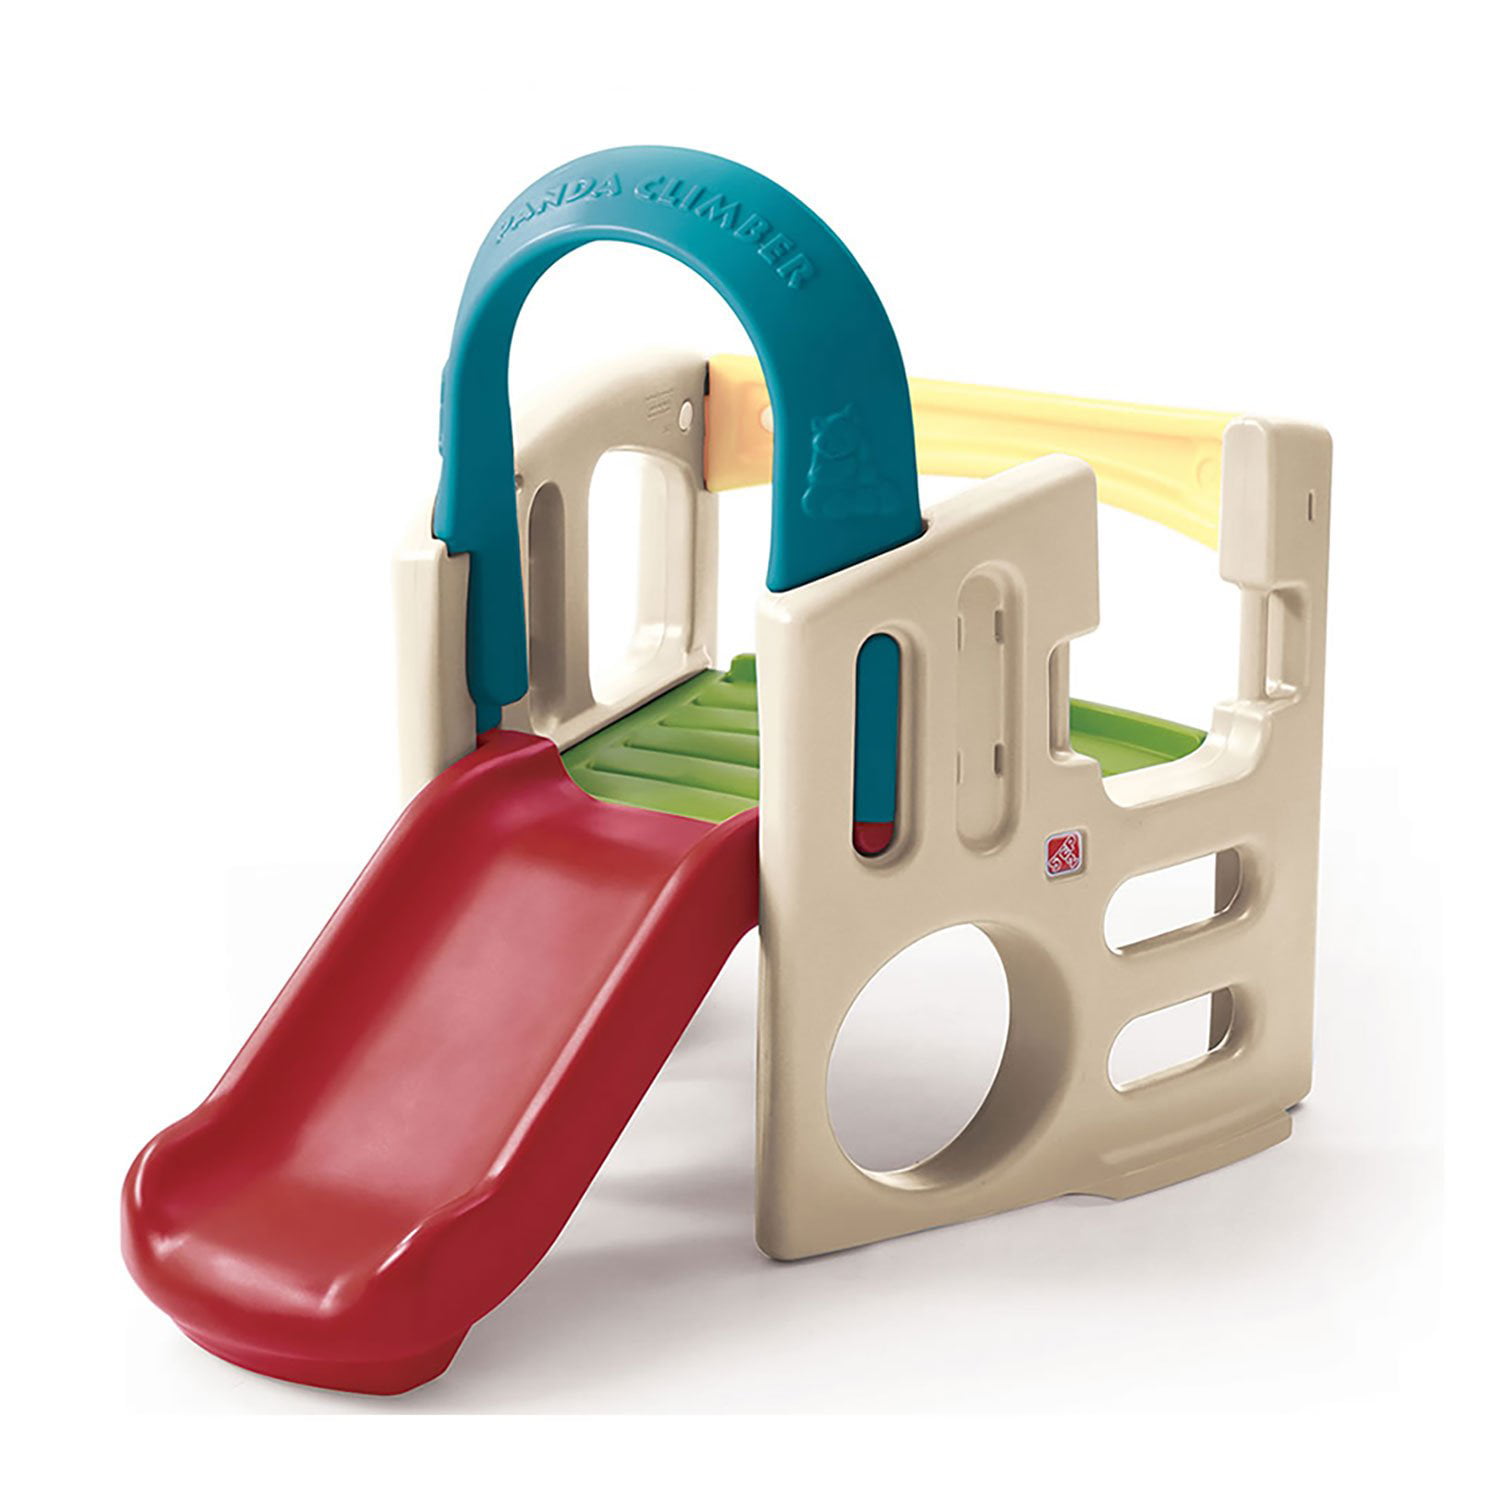 toddler playset with slide